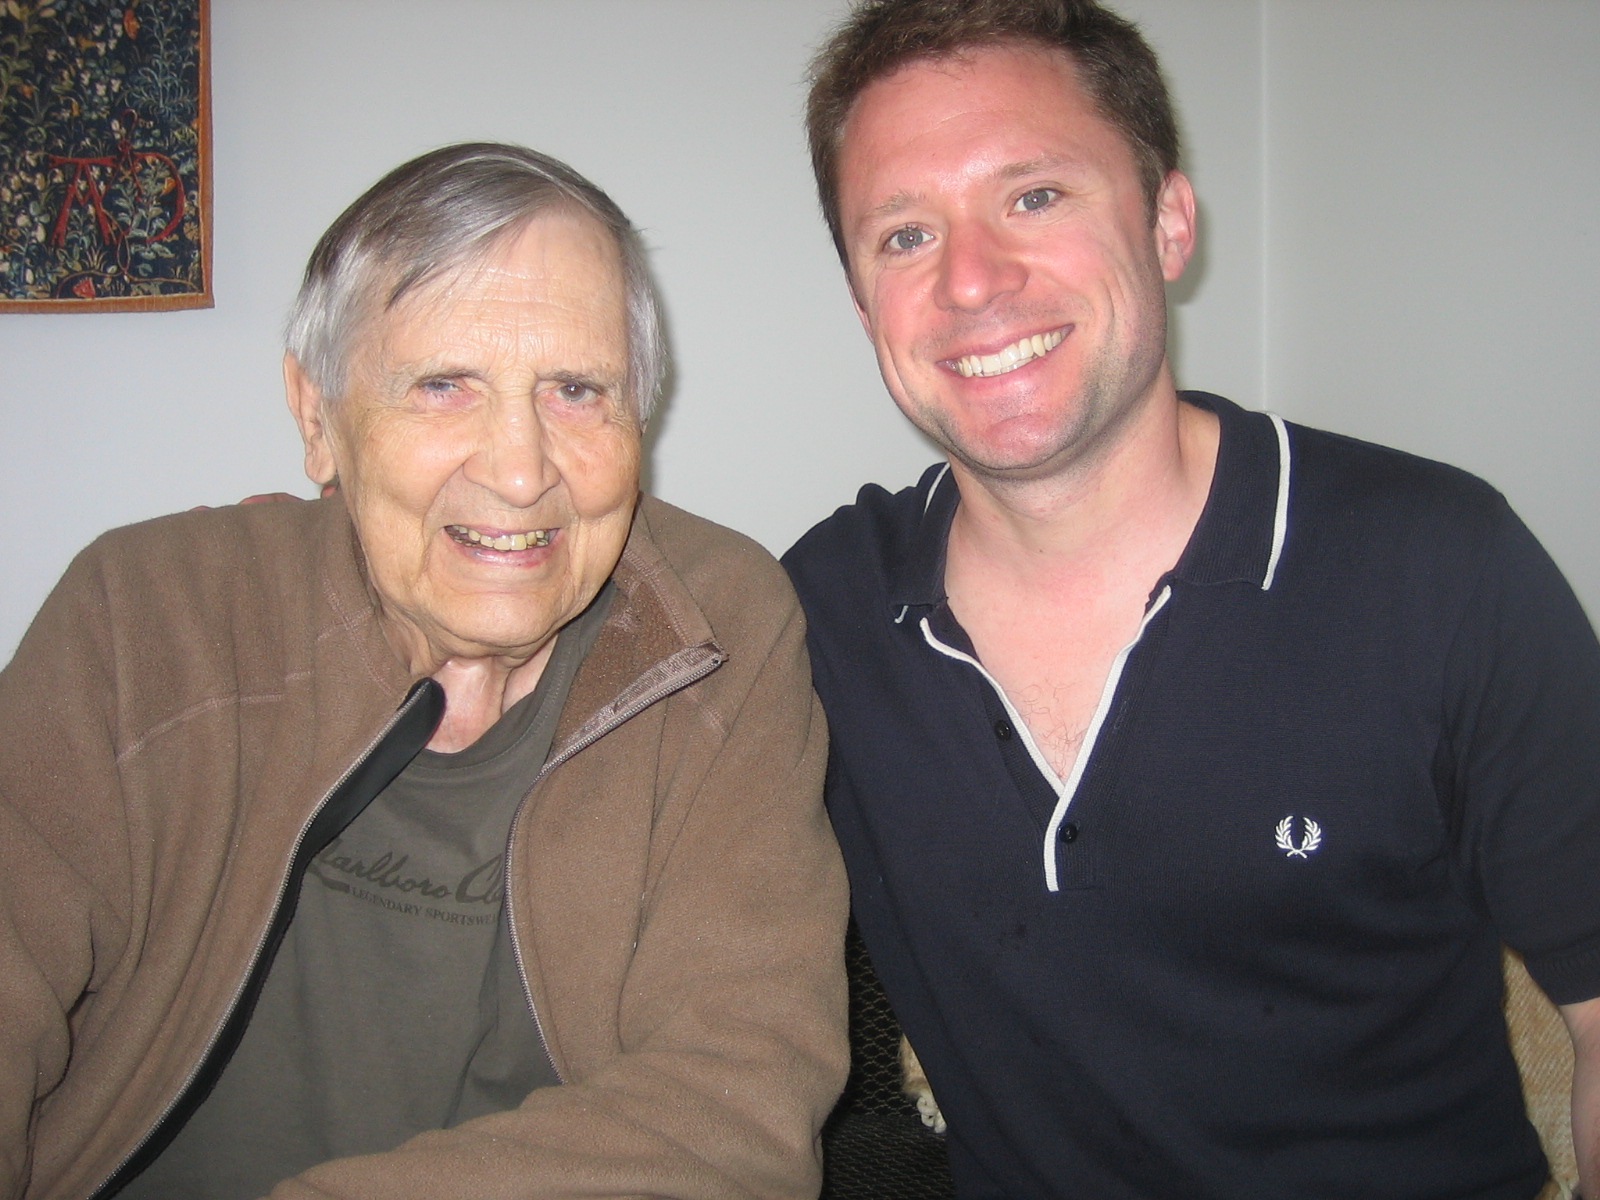 With Einojuhani Rautavaara in Helsinki in May 2009, a few months prior to the premiere of ‘Incantations’